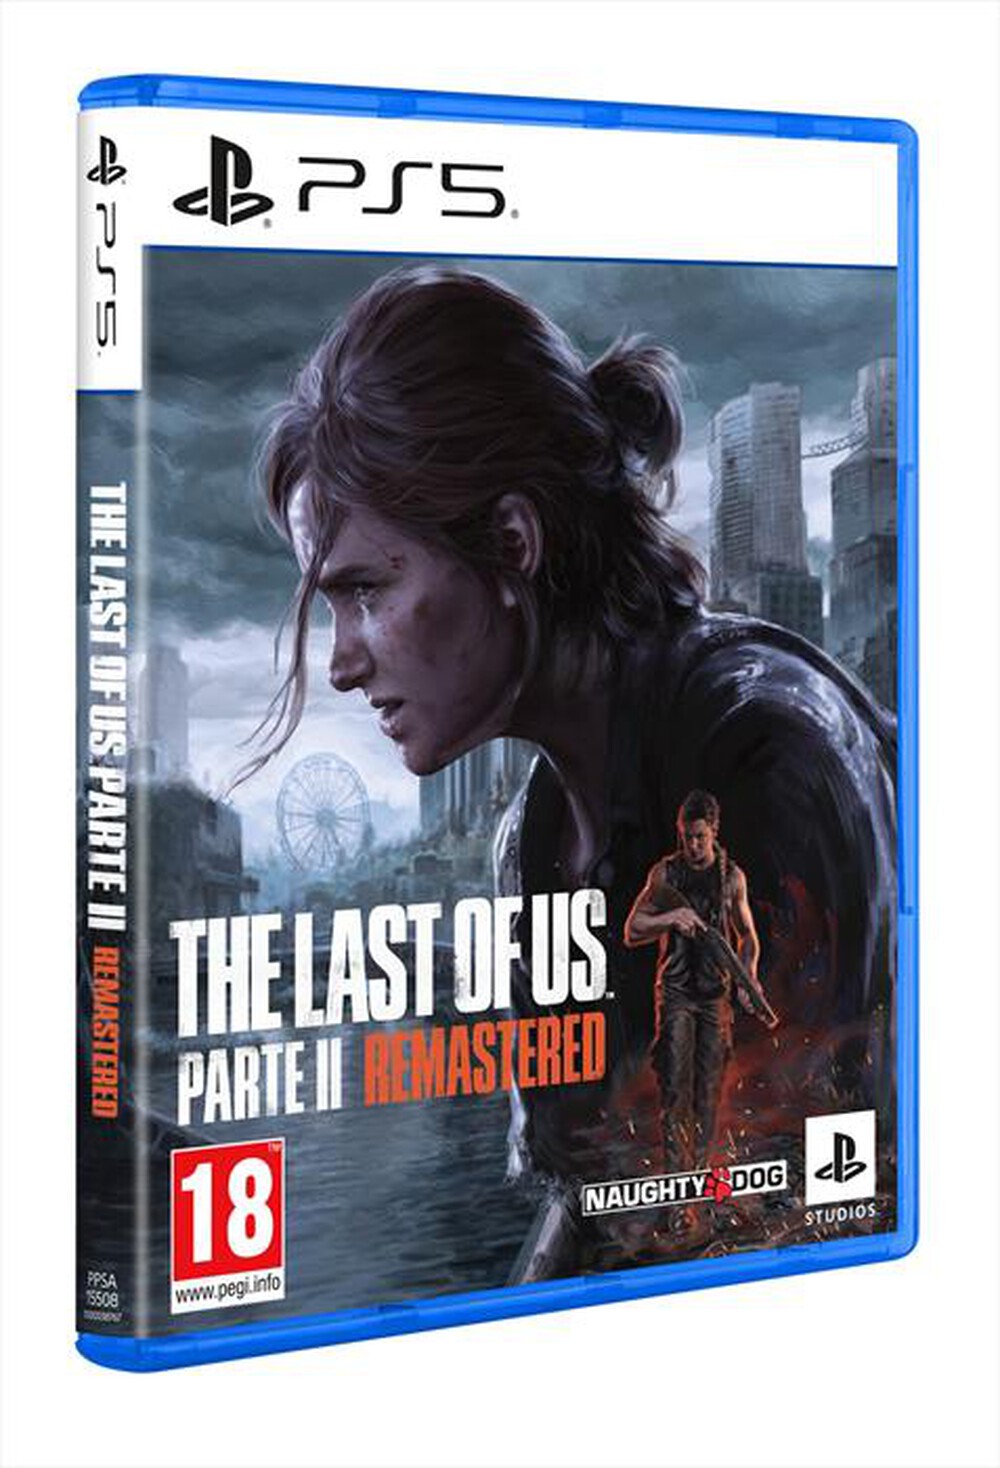 "SONY COMPUTER - THE LAST OF US PARTE II - REMASTERED PS5"